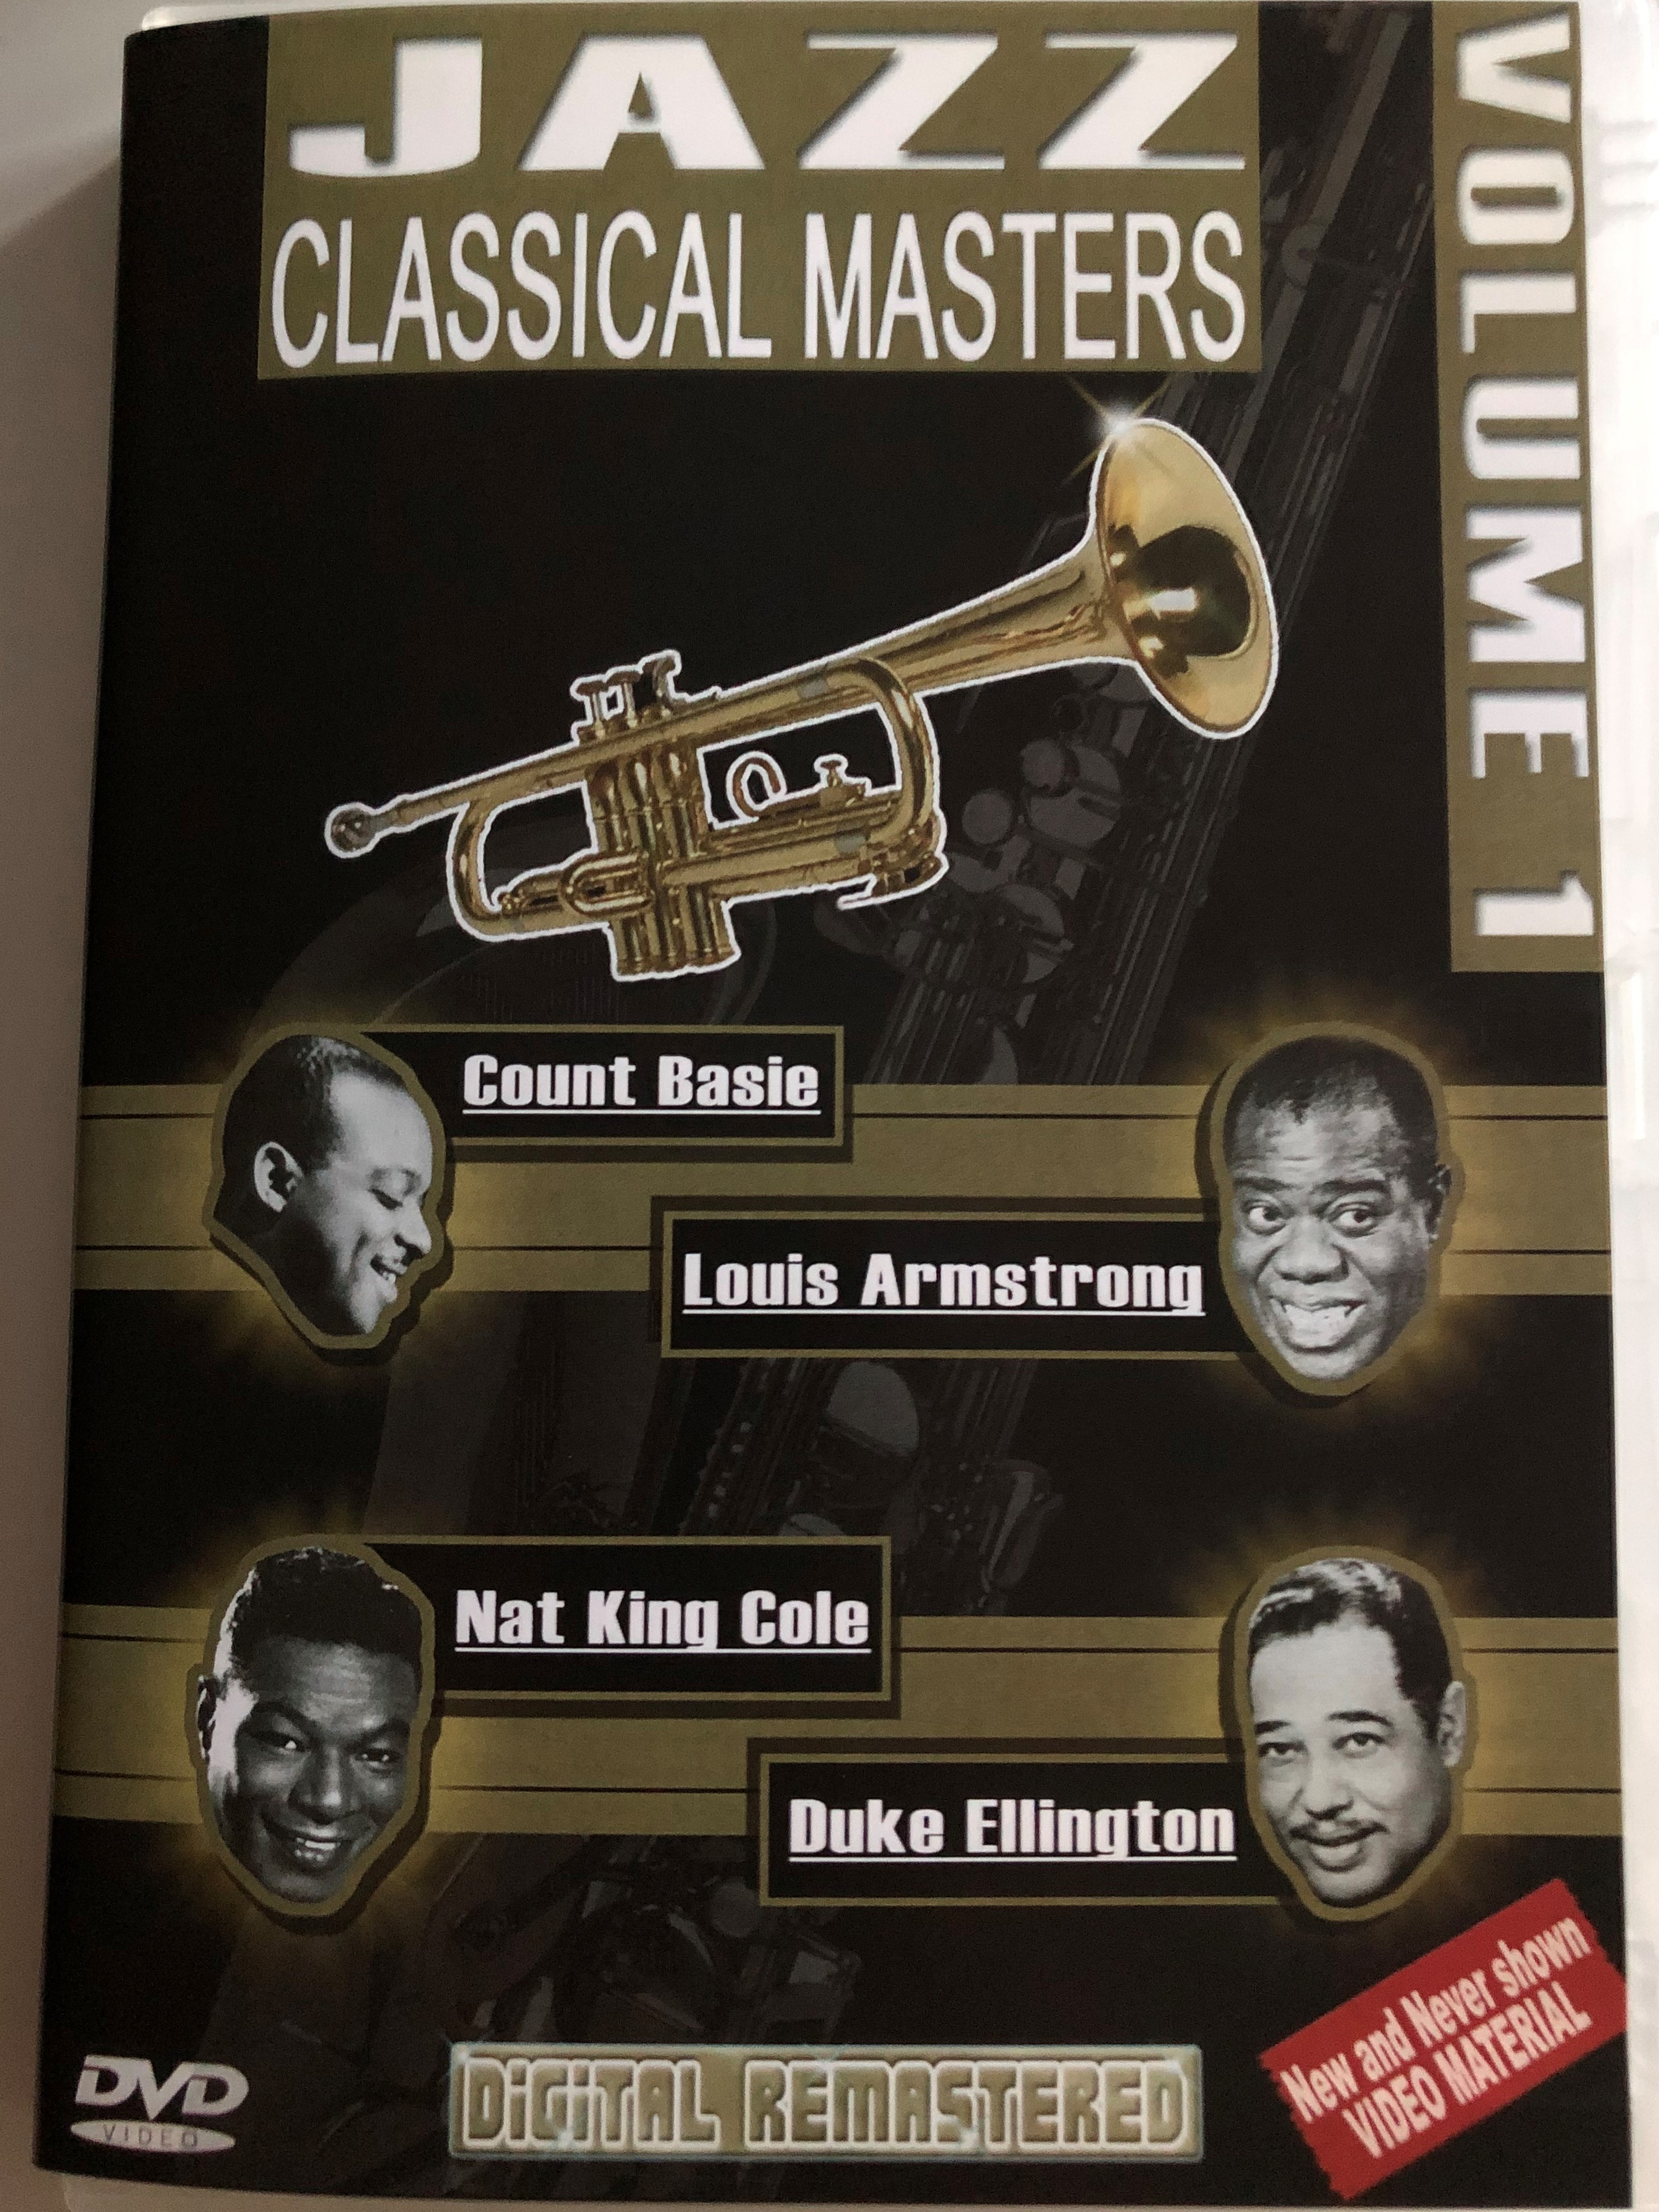 jazz-classical-masters-vol.-1-dvd-count-basie-louis-armstrong-nat-king-cole-duke-ellington-digitally-remastered-1-.jpg